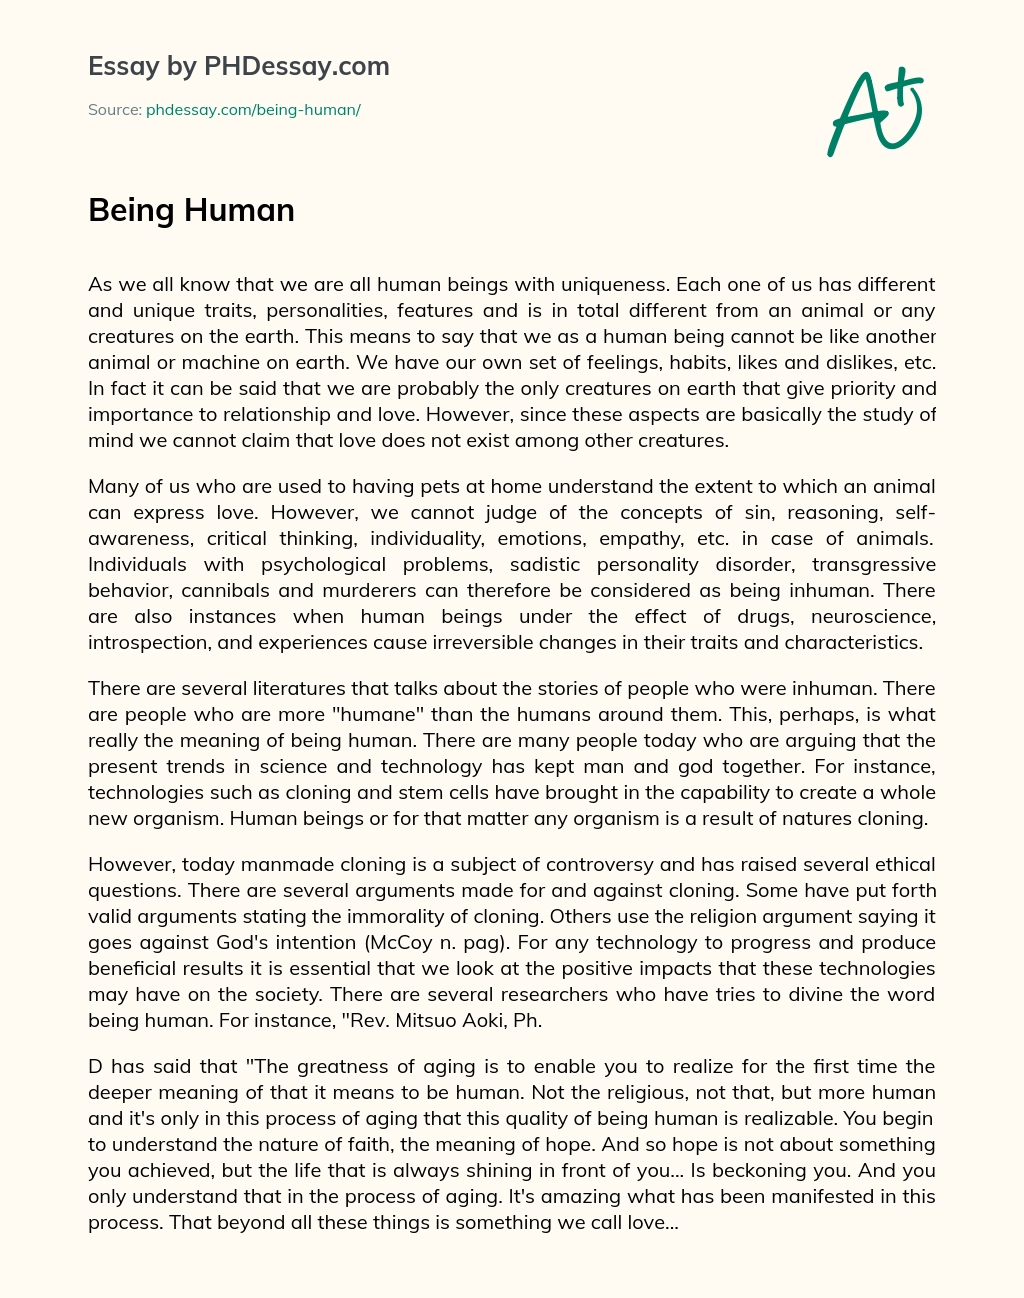 The Uniqueness of Human Beings and the Importance of Relationships and Love essay